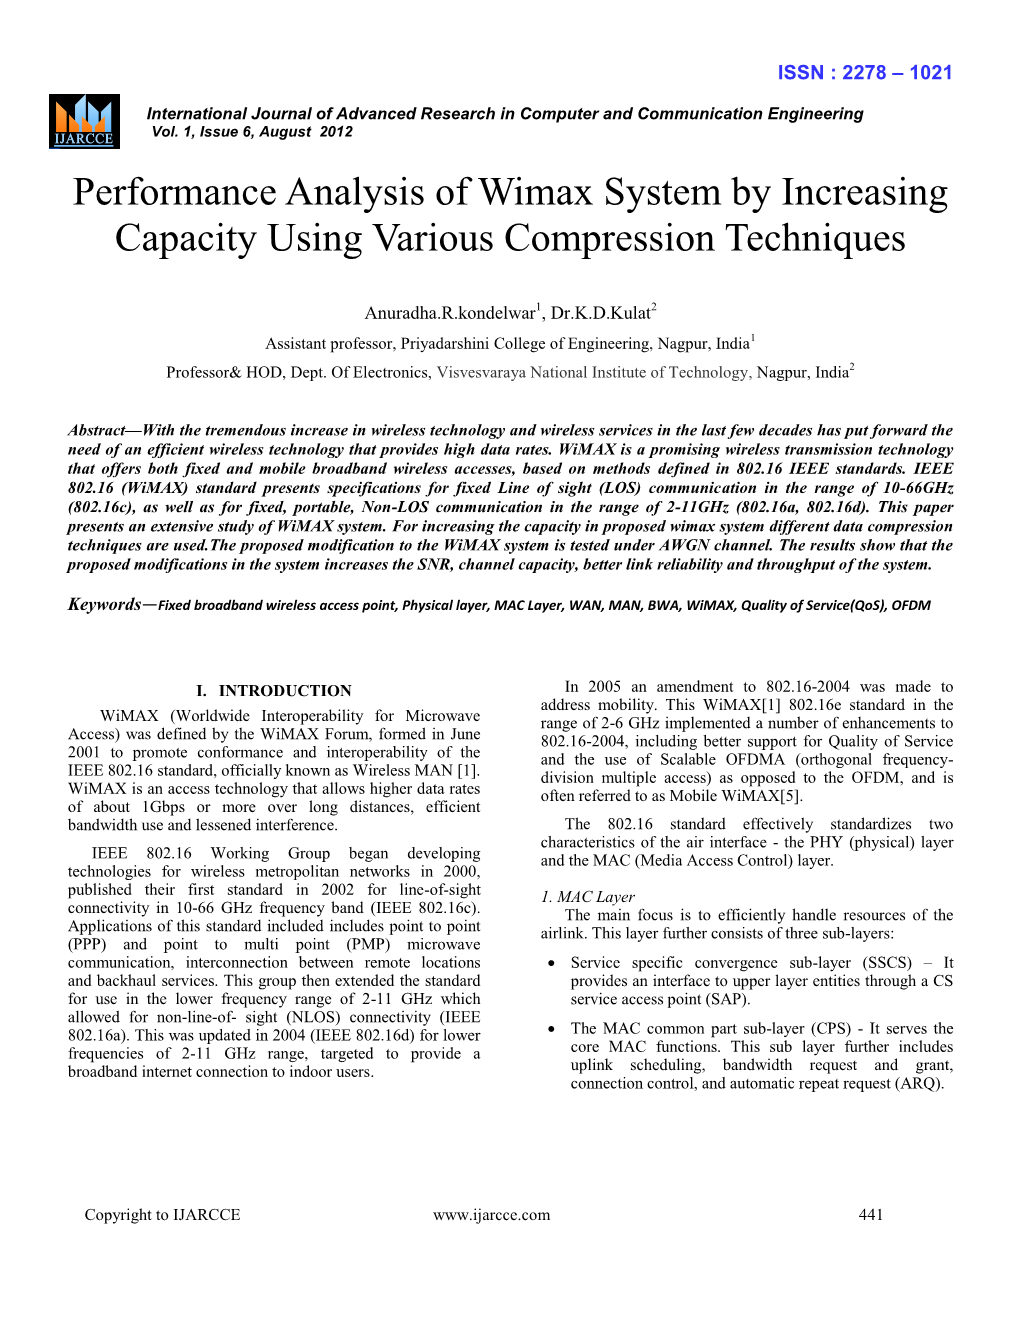 Performance Analysis of Wimax System by Increasing Capacity Using Various Compression Techniques